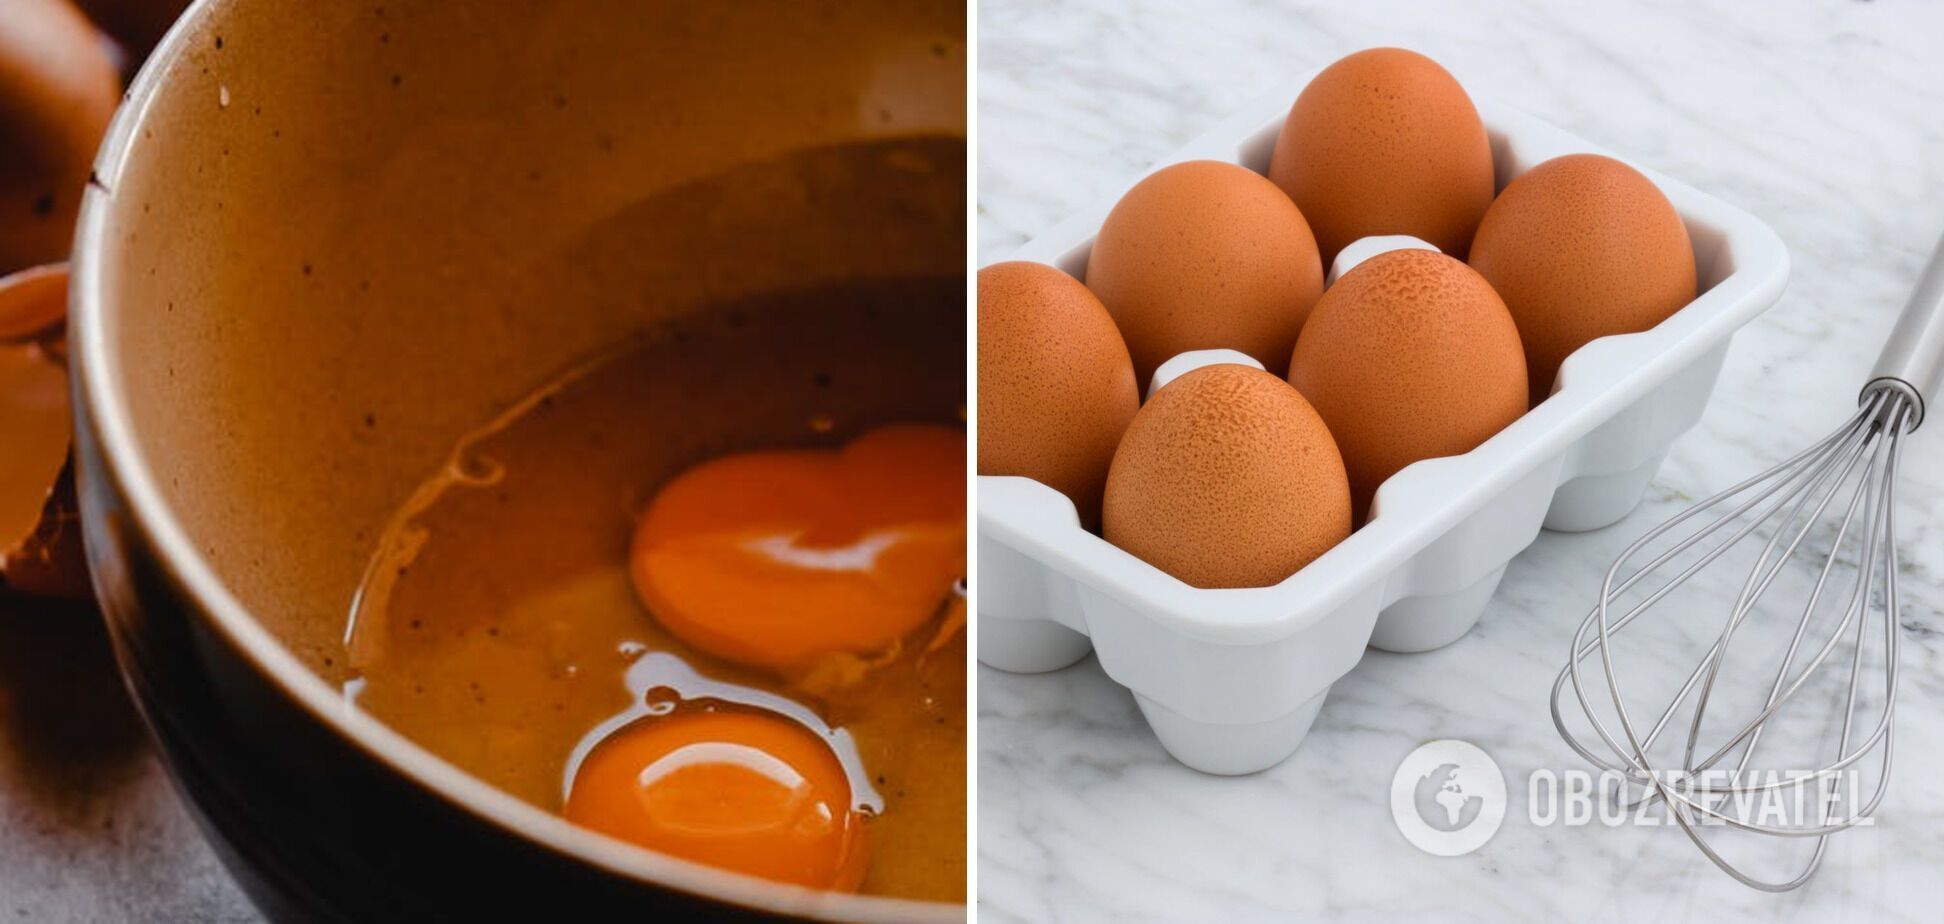 How to beat eggs without a whisk or mixer